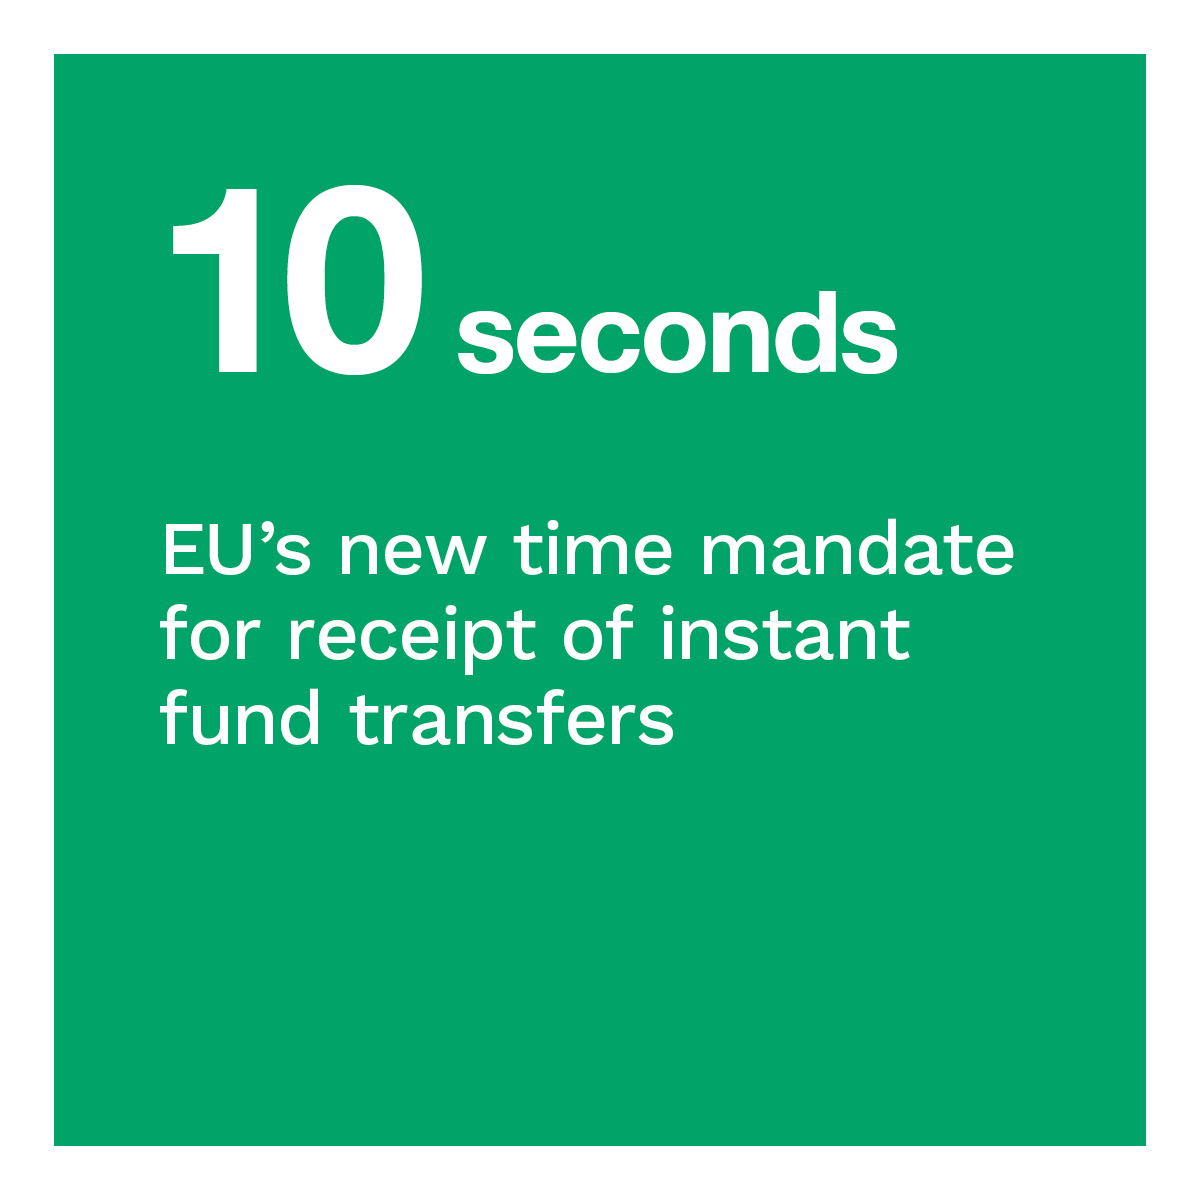  EU’s new time mandate for receipt of instant fund transfers